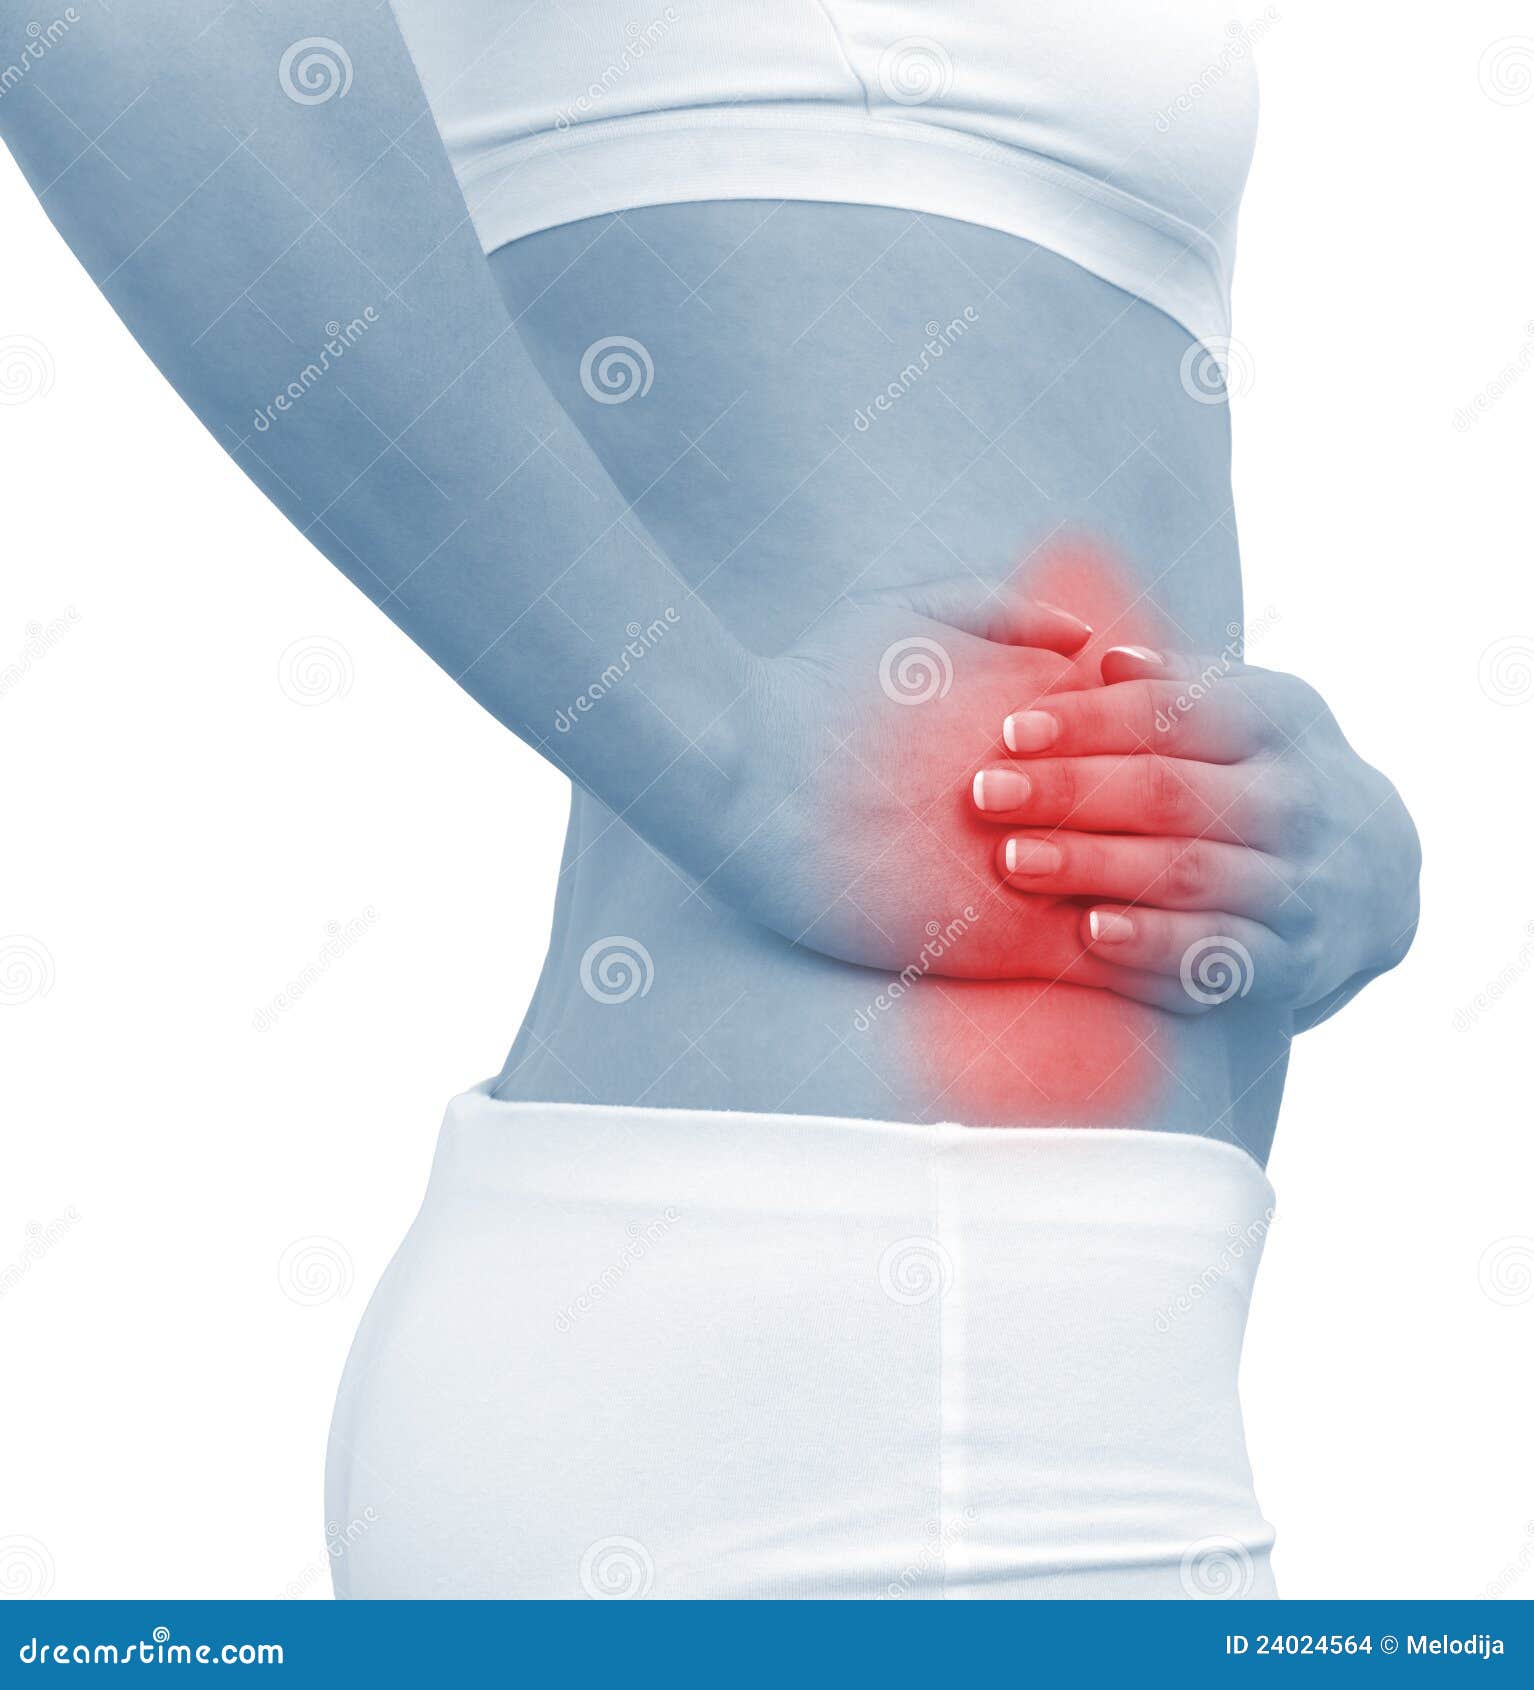 Acute Pain In A Woman Section Of Kidney Stock Photo - Image of cramp